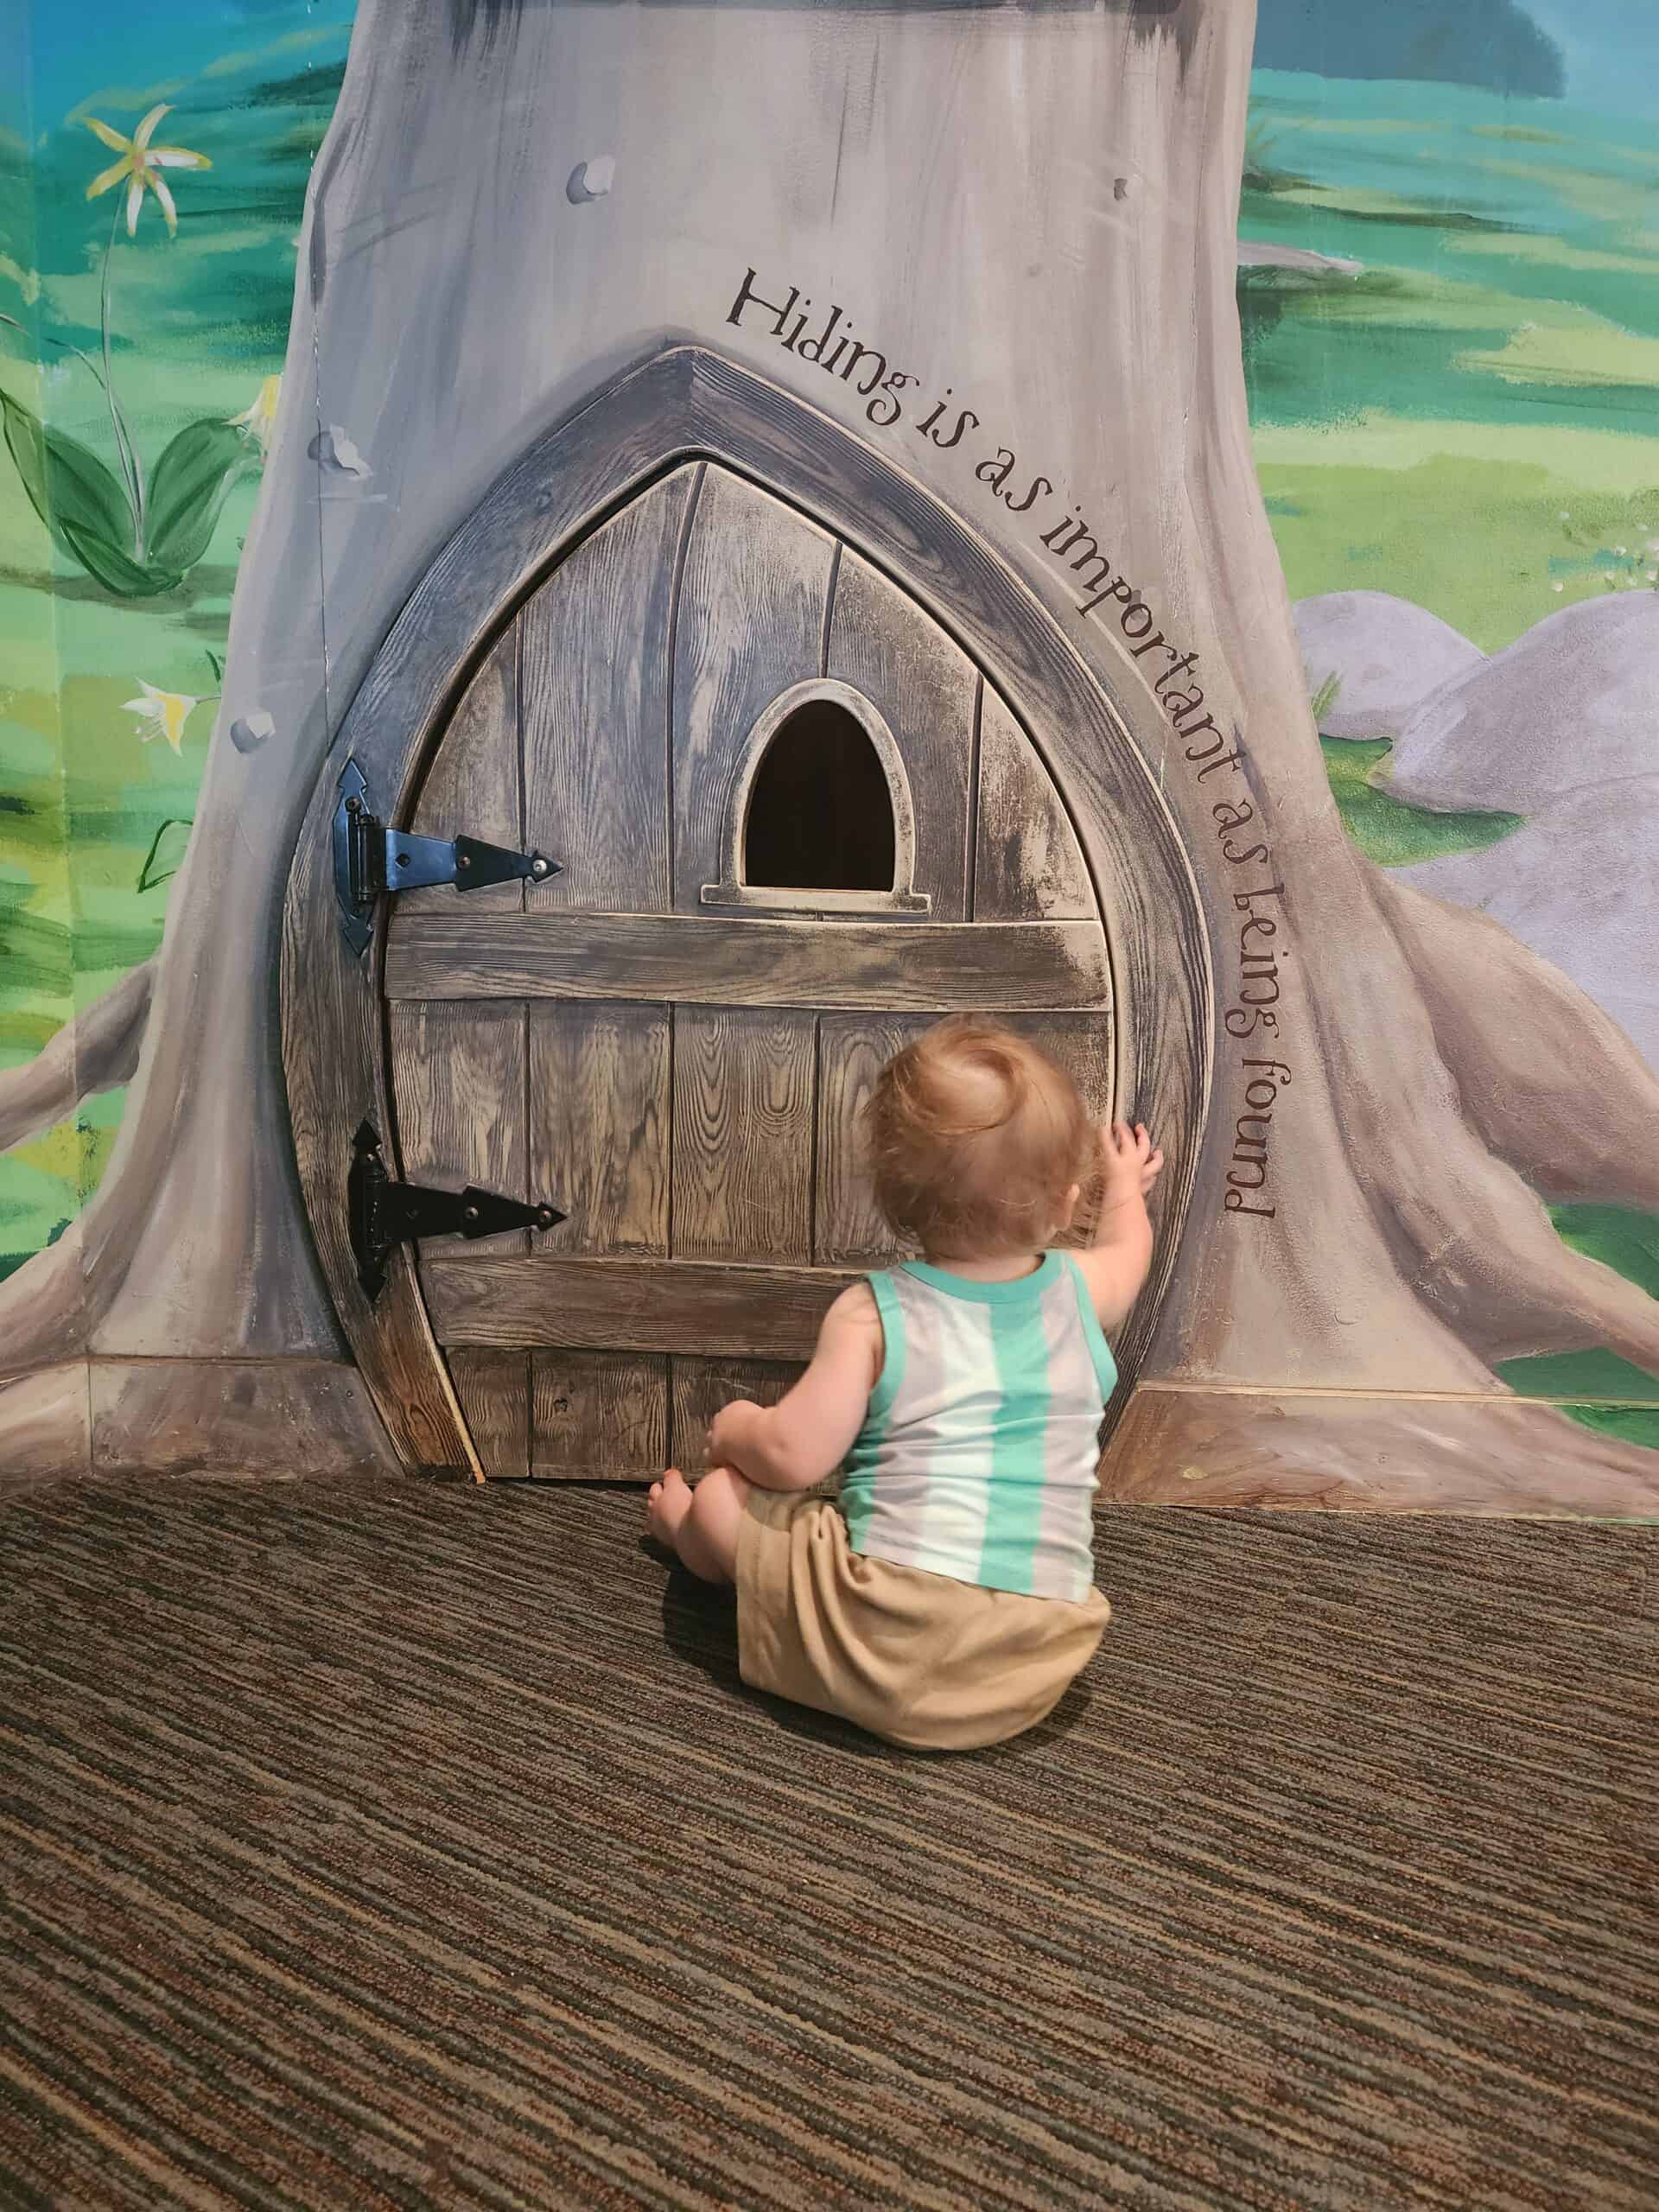 A toddler is engrossed in exploring a whimsical painted tree door in a play area, with the intriguing message 'Hiding is as important as being found' above, sparking curiosity and imagination in a child-friendly environment